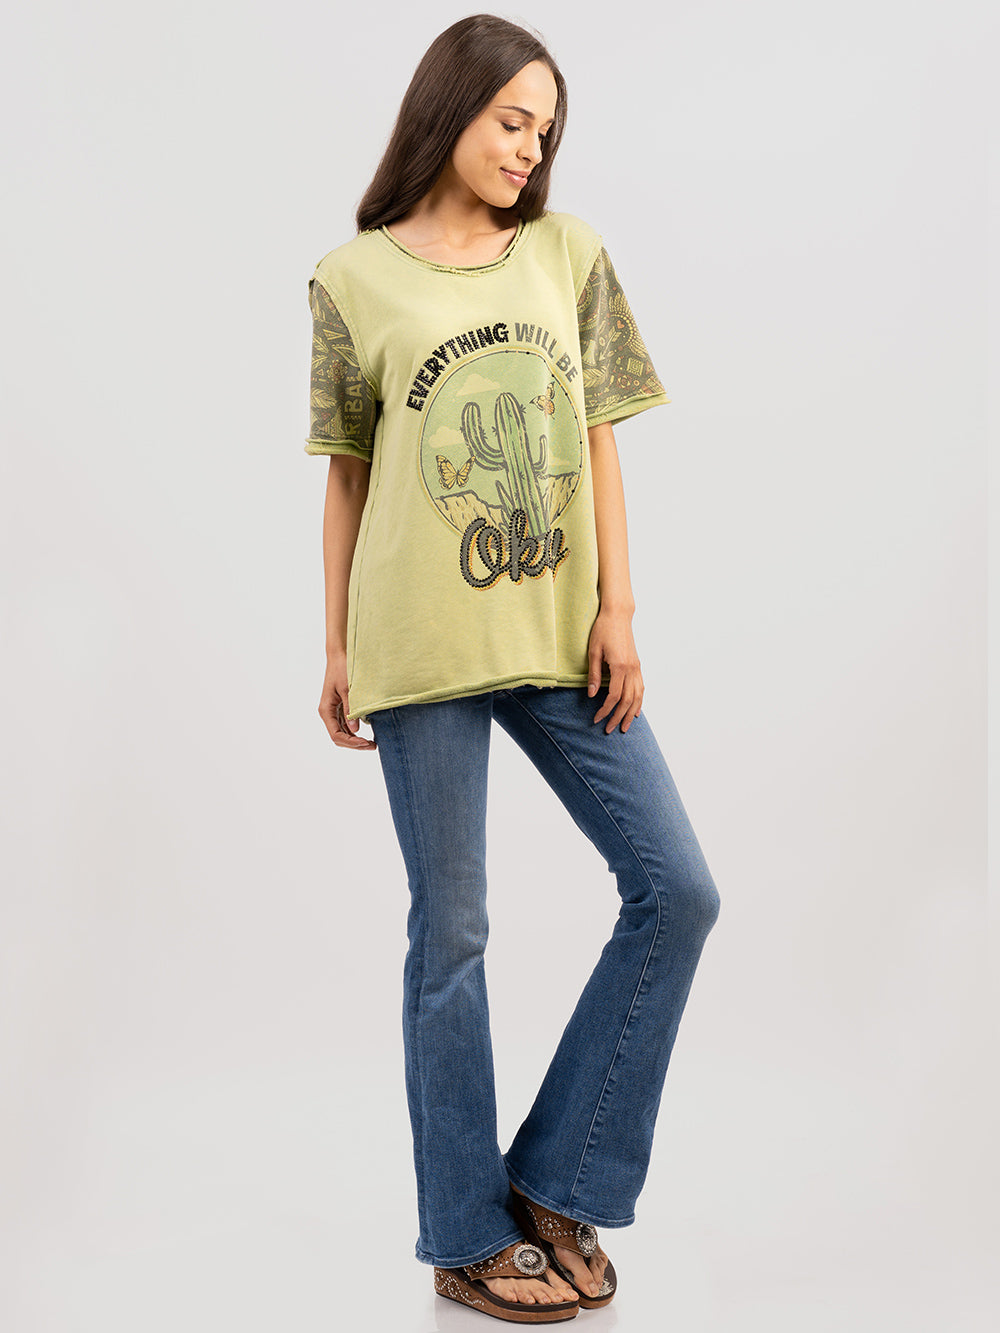 Delila Women Embroidered Washed Cactus Tee With Rhinestones - Montana West World